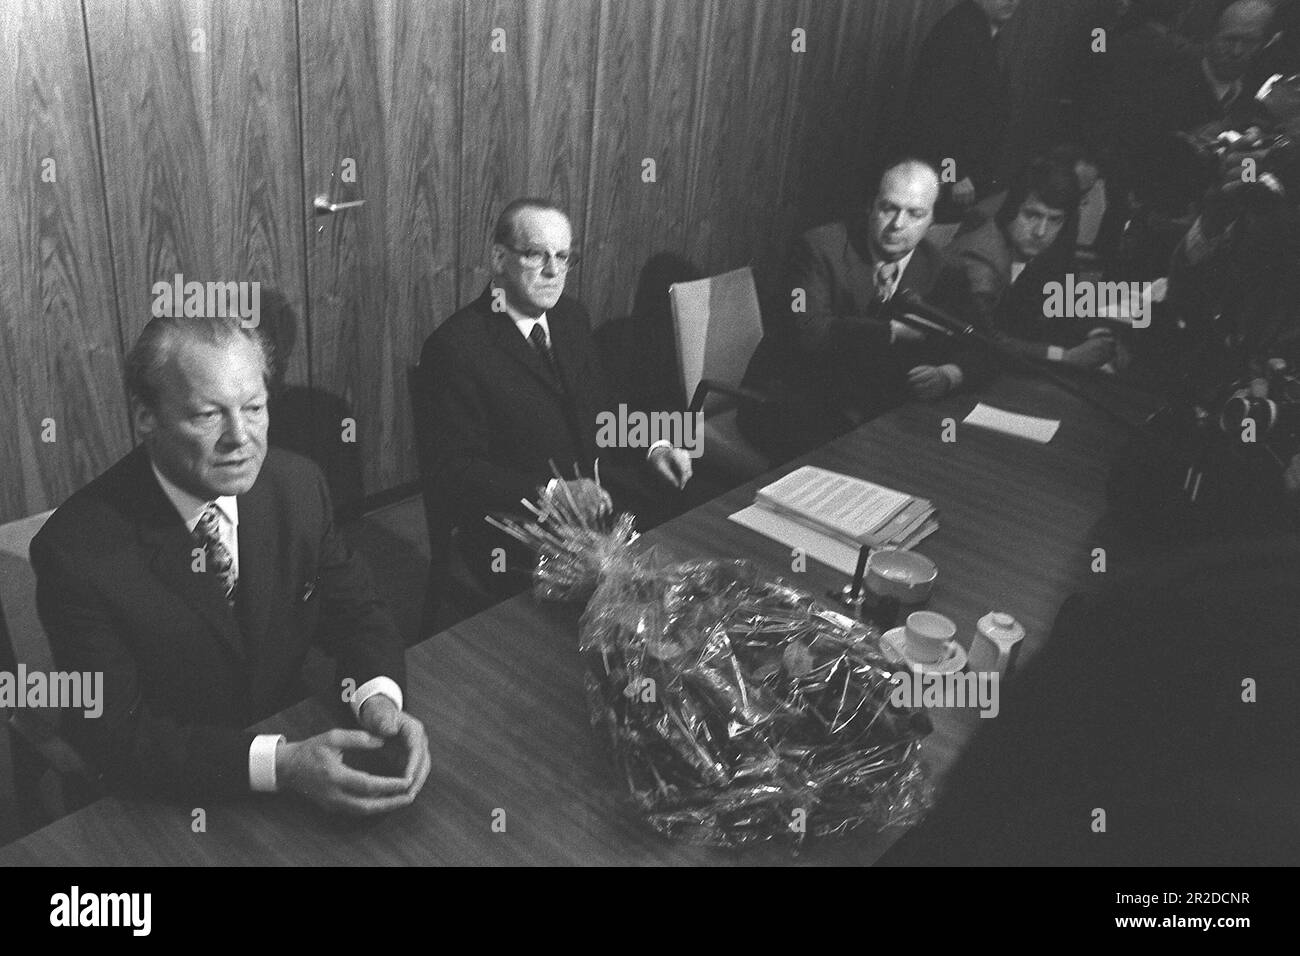 ARCHIVE PHOTO: The SPD will be 160 years old on May 23, 2023, Federal Chancellor Willy BRANDT, SPD (left) is sitting at the table in the parliamentary group hall after his resignation, Herbert WEHNER next to him, a bouquet of flowers on the table, SW photo, May 7th, 1974. ?SVEN SIMON, Princess-Luise-Str.41#45479 Muelheim/Ruhr#tel.0208/9413250#fax 0208/9413260#account 1428150 Commerzbank Essen BLZ 36040039 #www.SvenSimon.net#e-mail:SvenSimon@t -online.de. Stock Photo